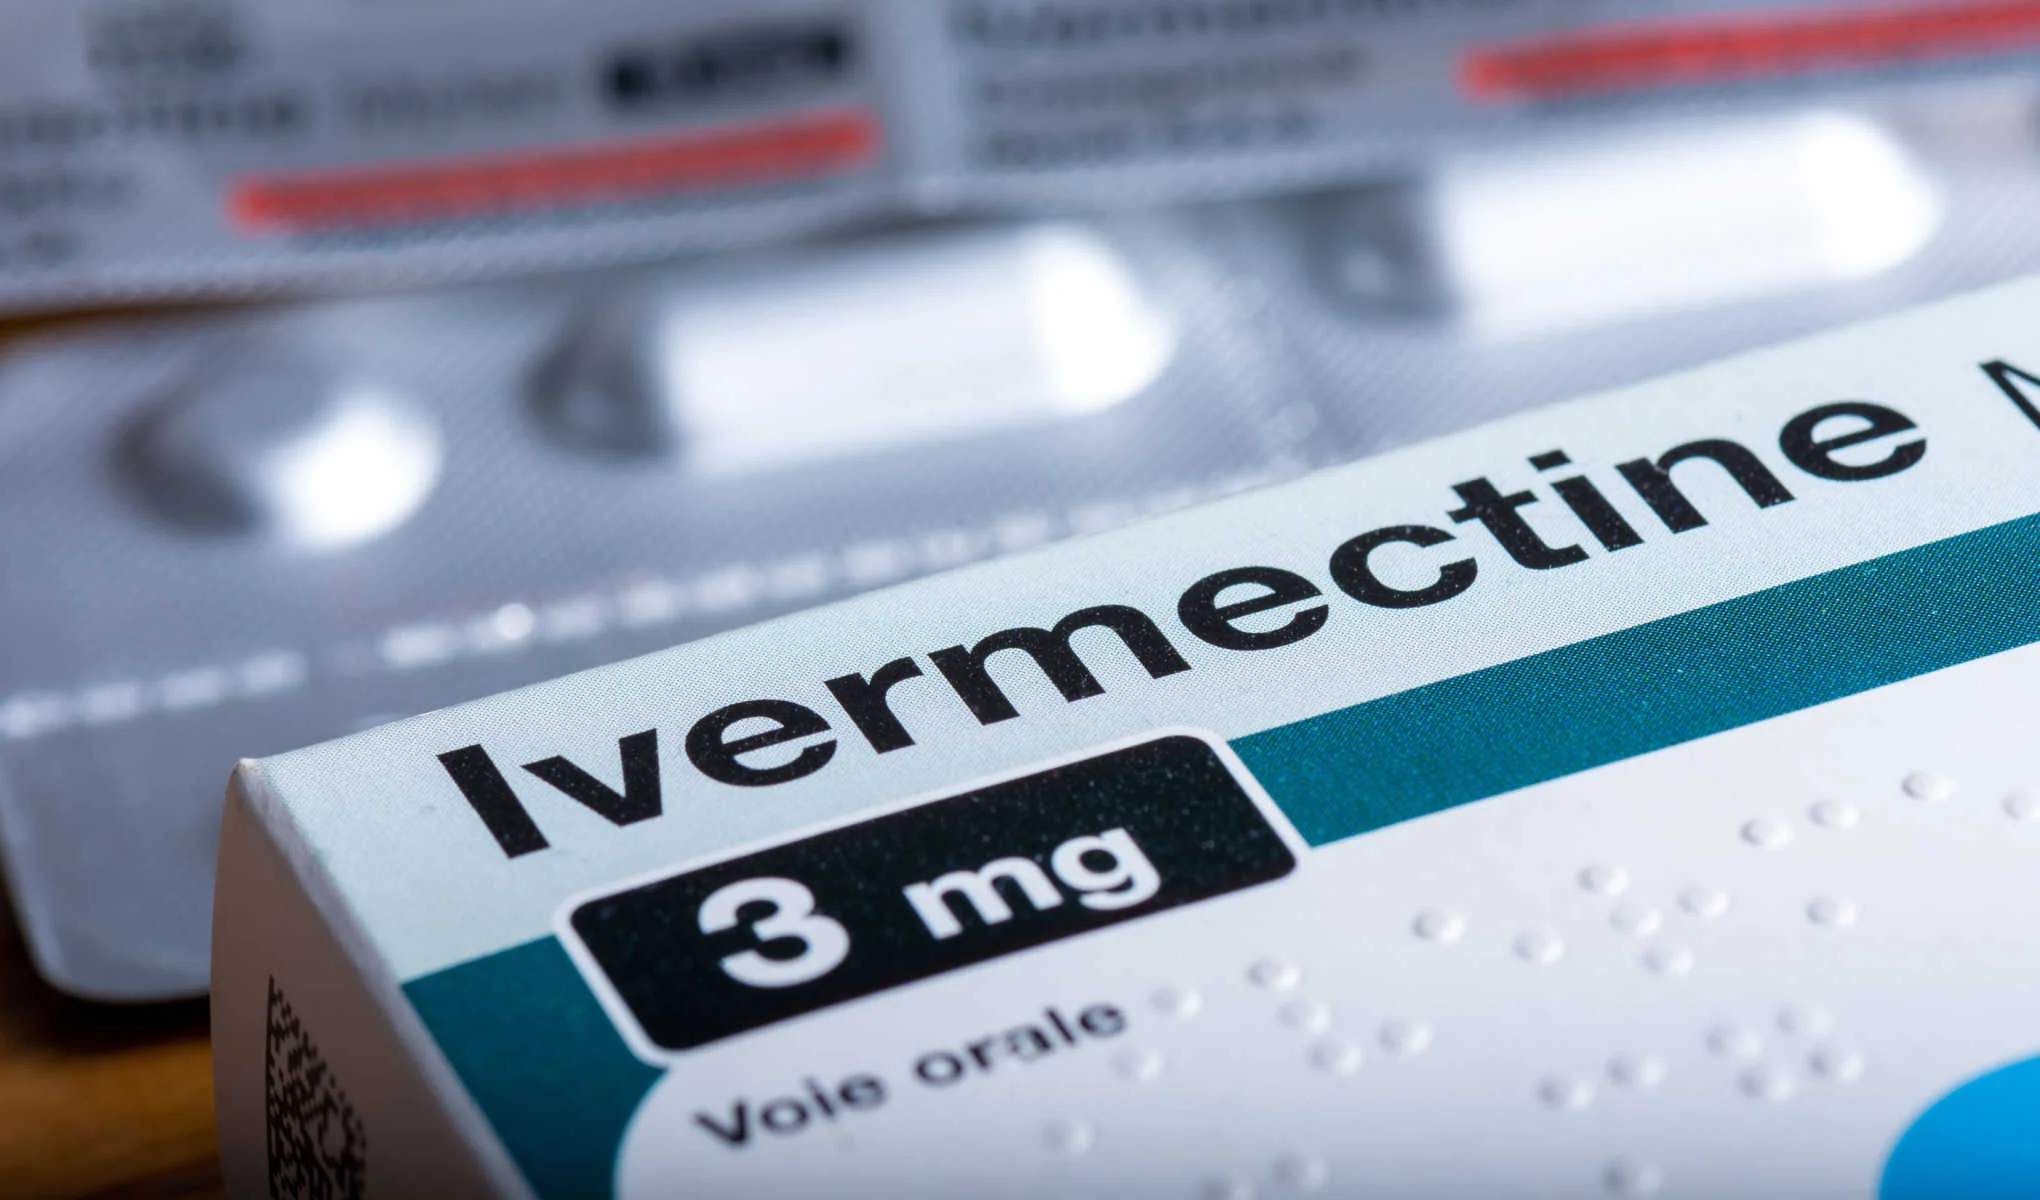 Setting the Record Straight on Ivermectin